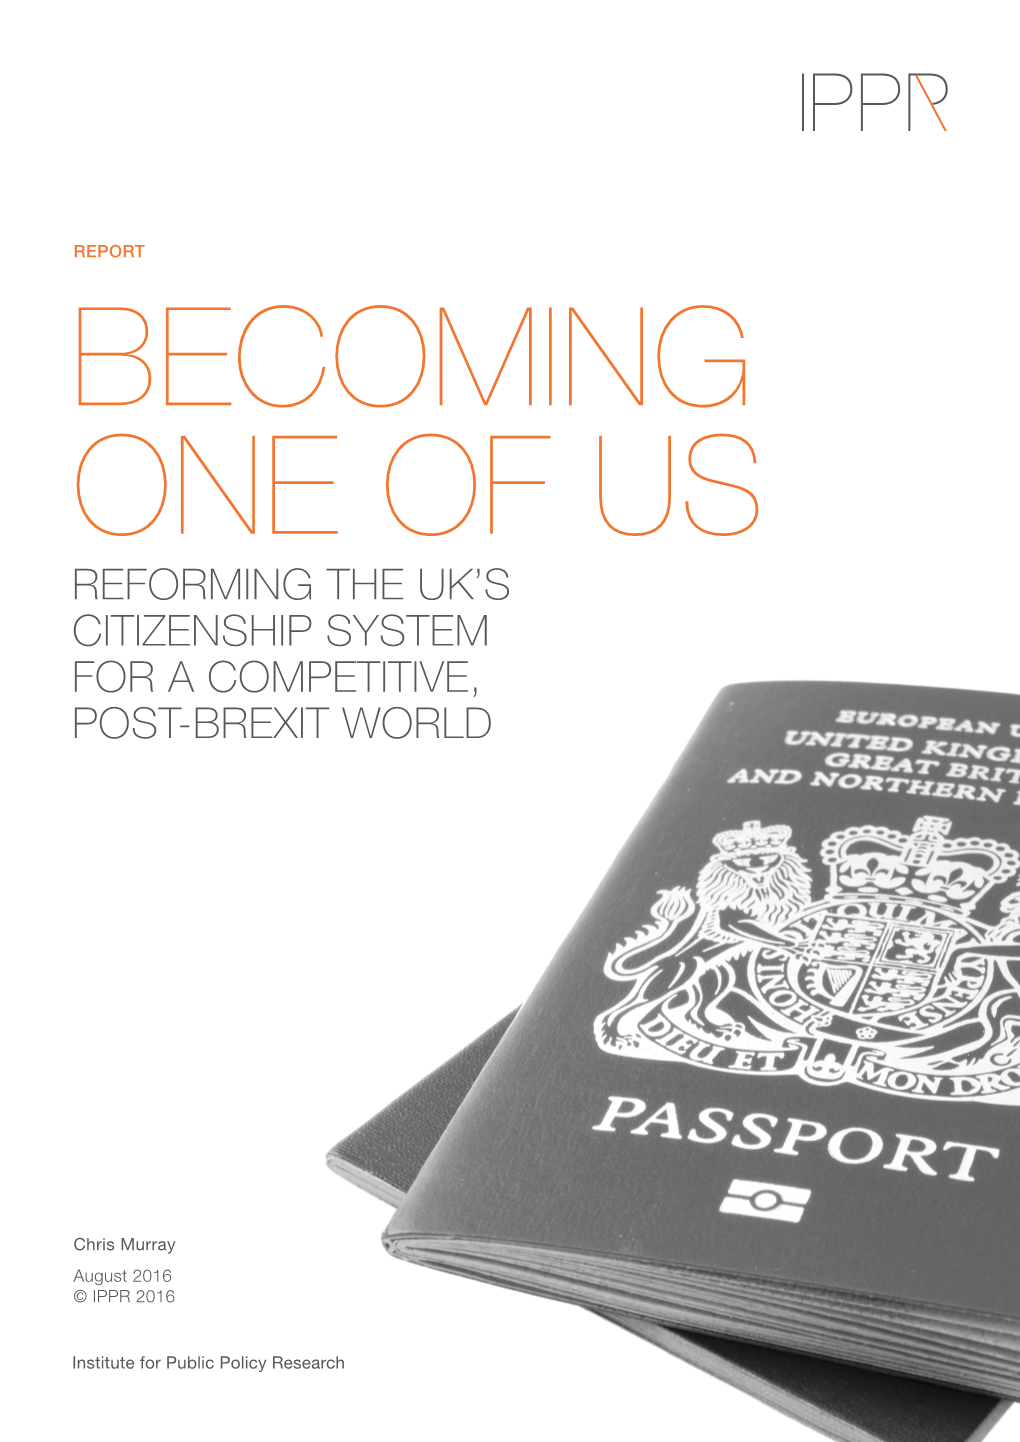 Reforming the UK's Citizenship System for a Competitive, Post-Brexit World ABOUT the AUTHOR Chris Murray Is a Research Fellow at IPPR